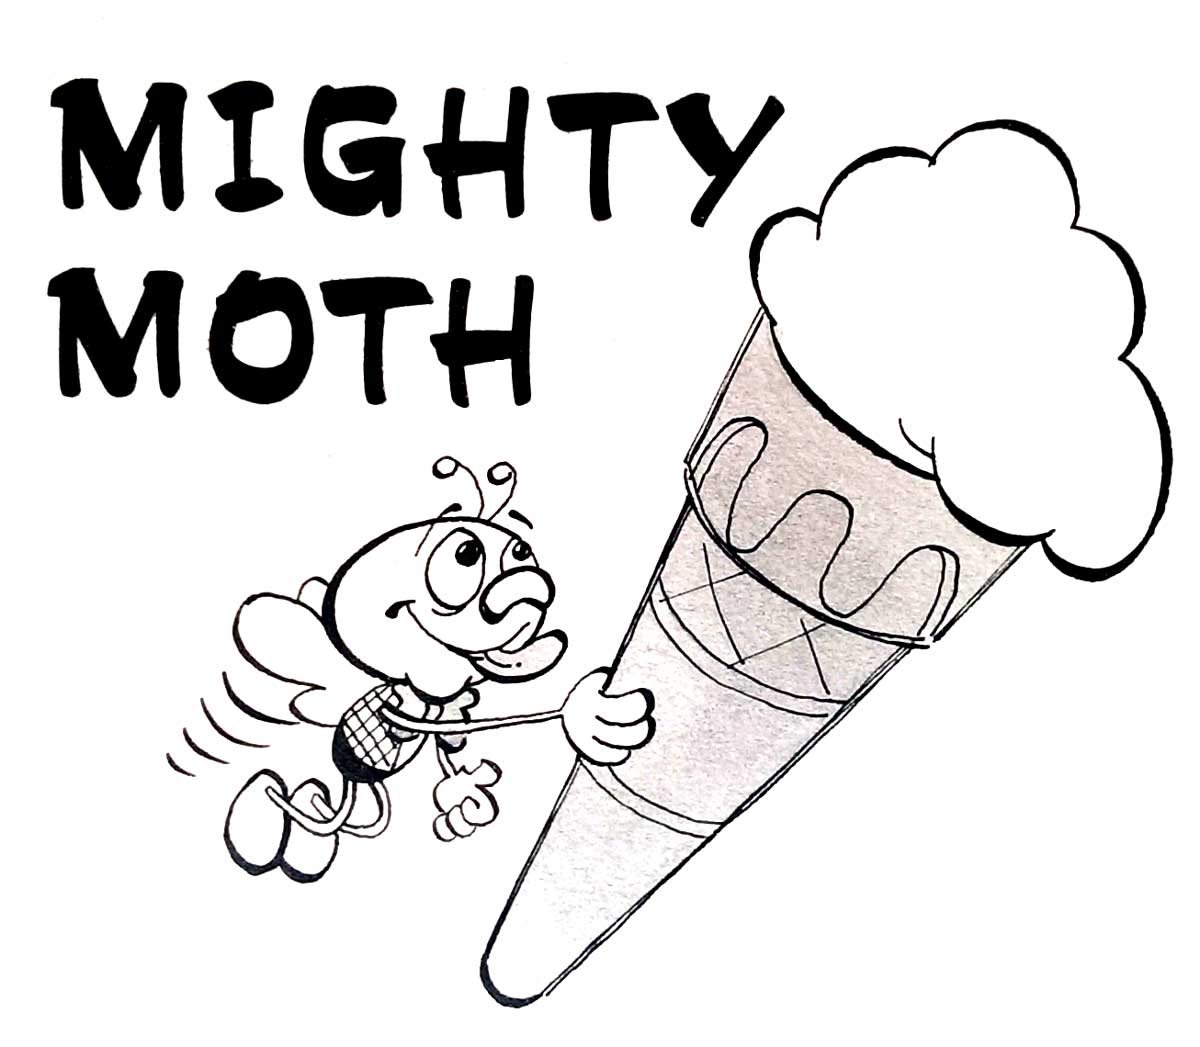 Mighty Moth by Dick Millington